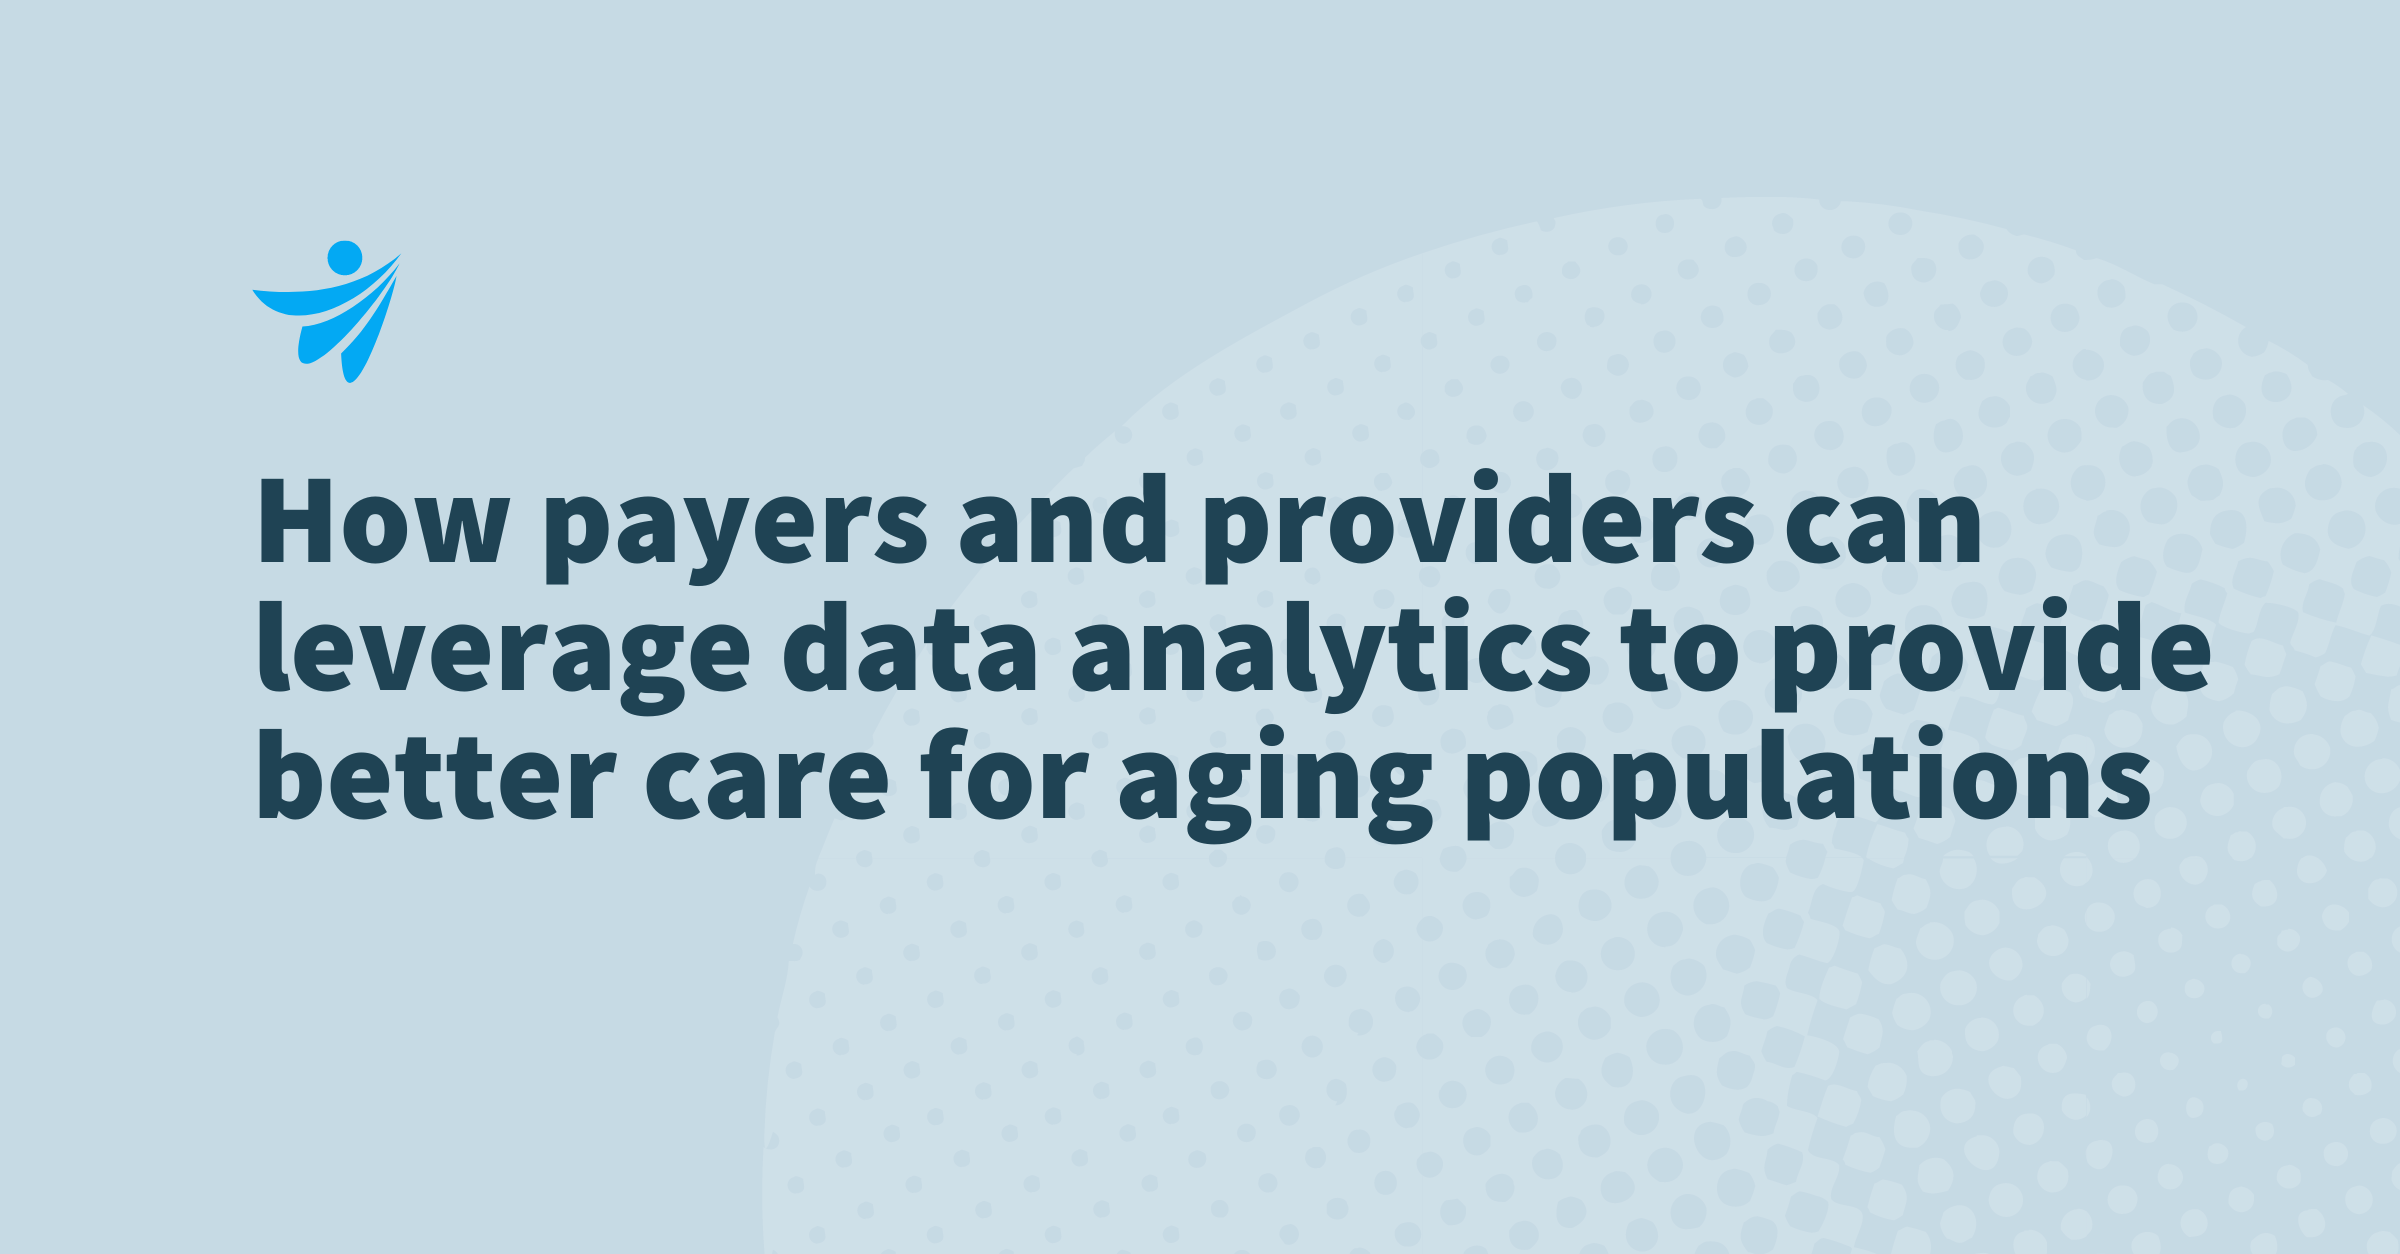 Thumbnail for How payers and providers can leverage data analytics to provide better care for aging populations